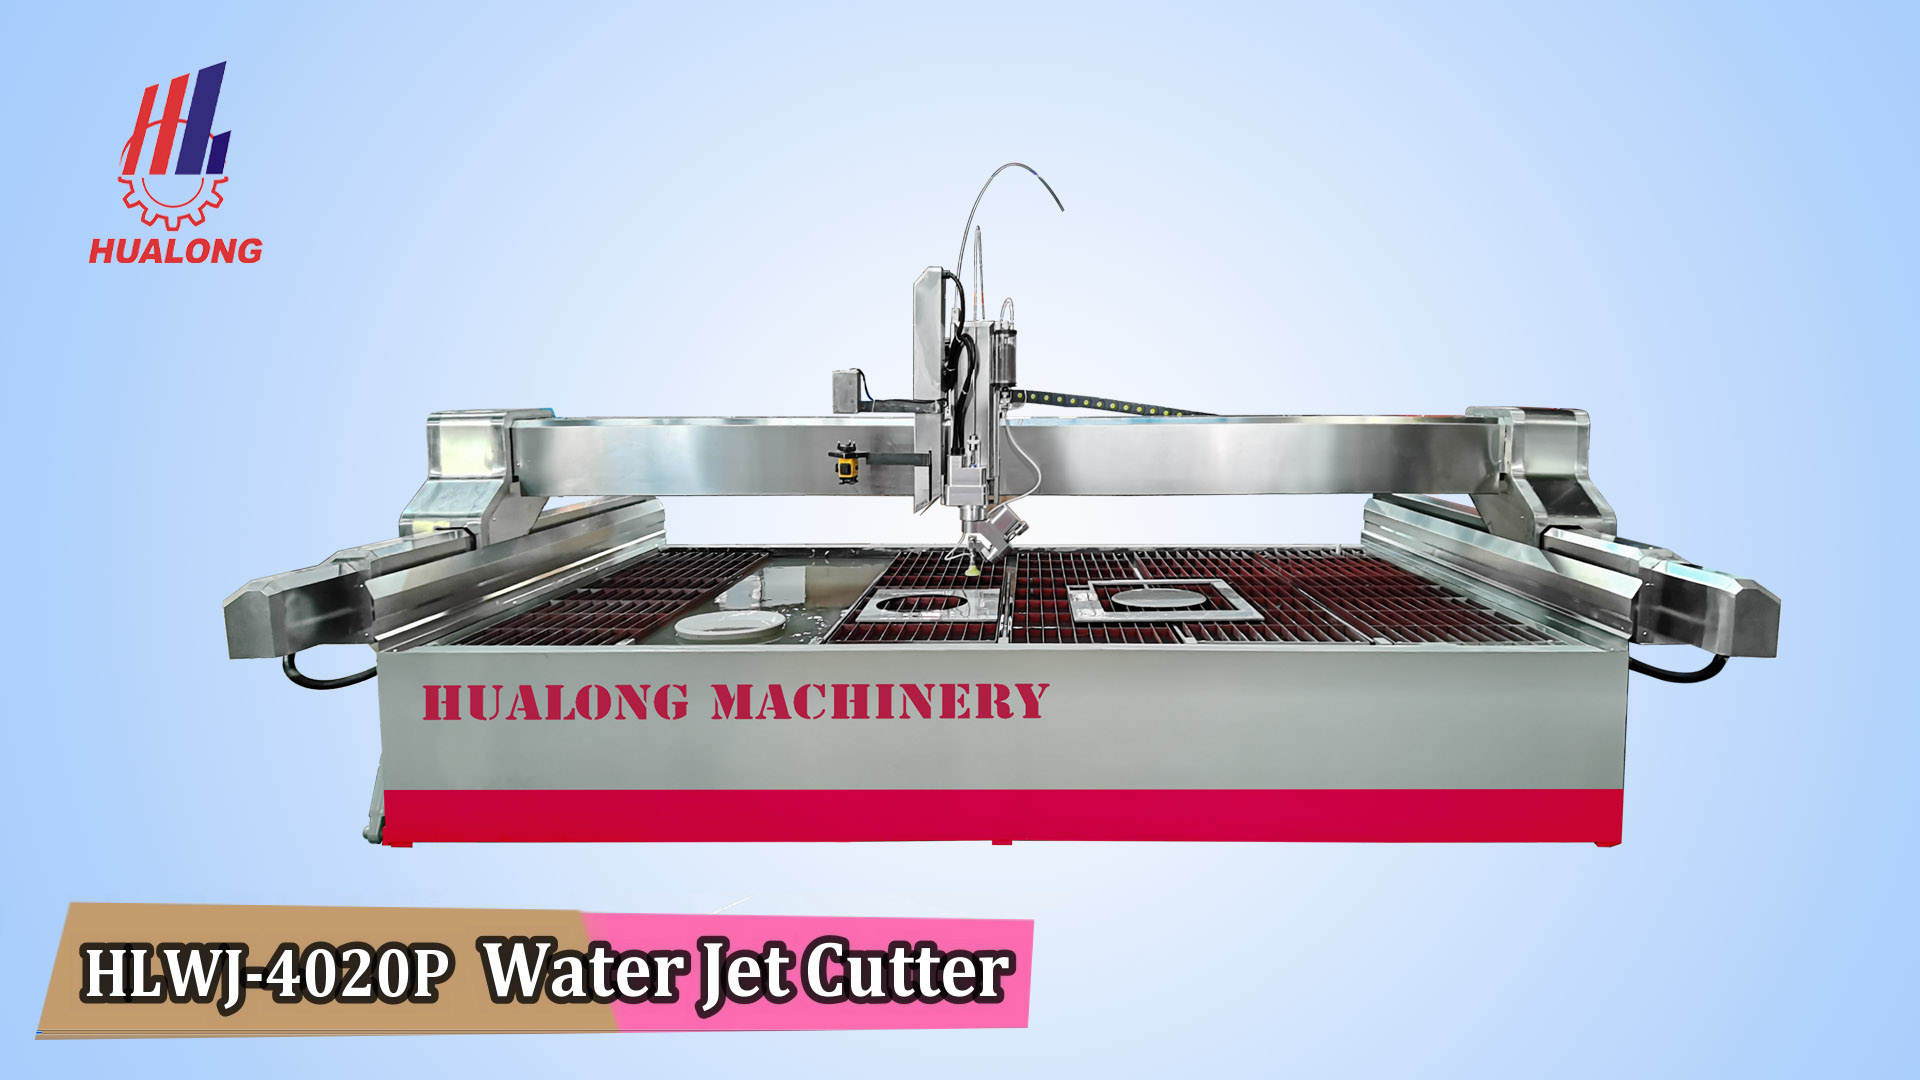 How does a waterjet cutting machine work?